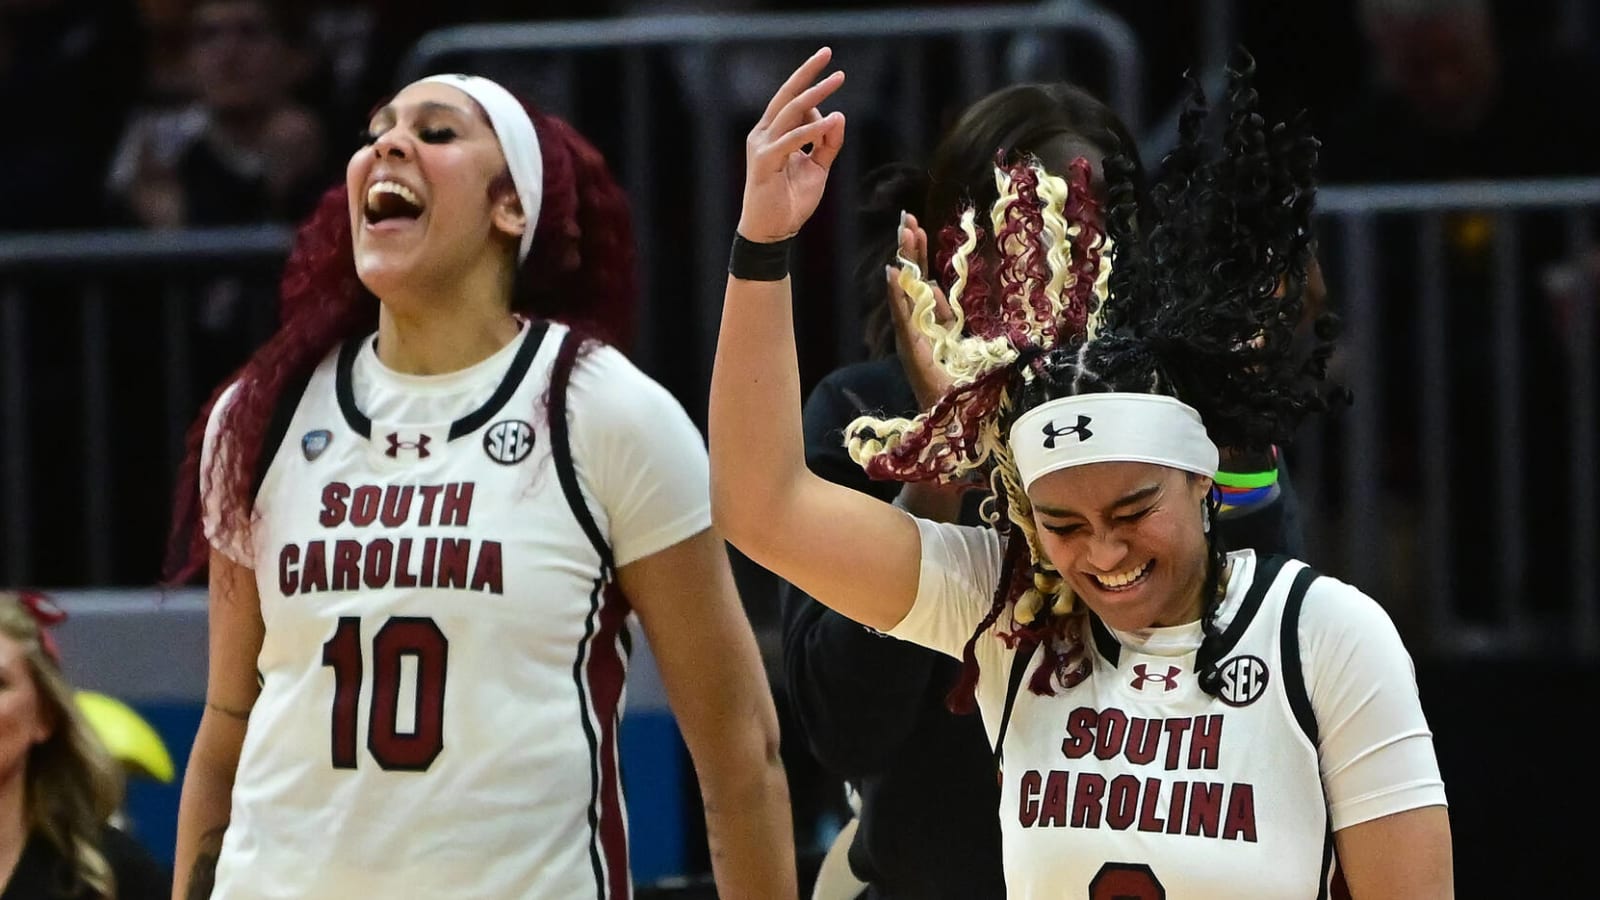 South Carolina secures dominant Final Four win over NC State